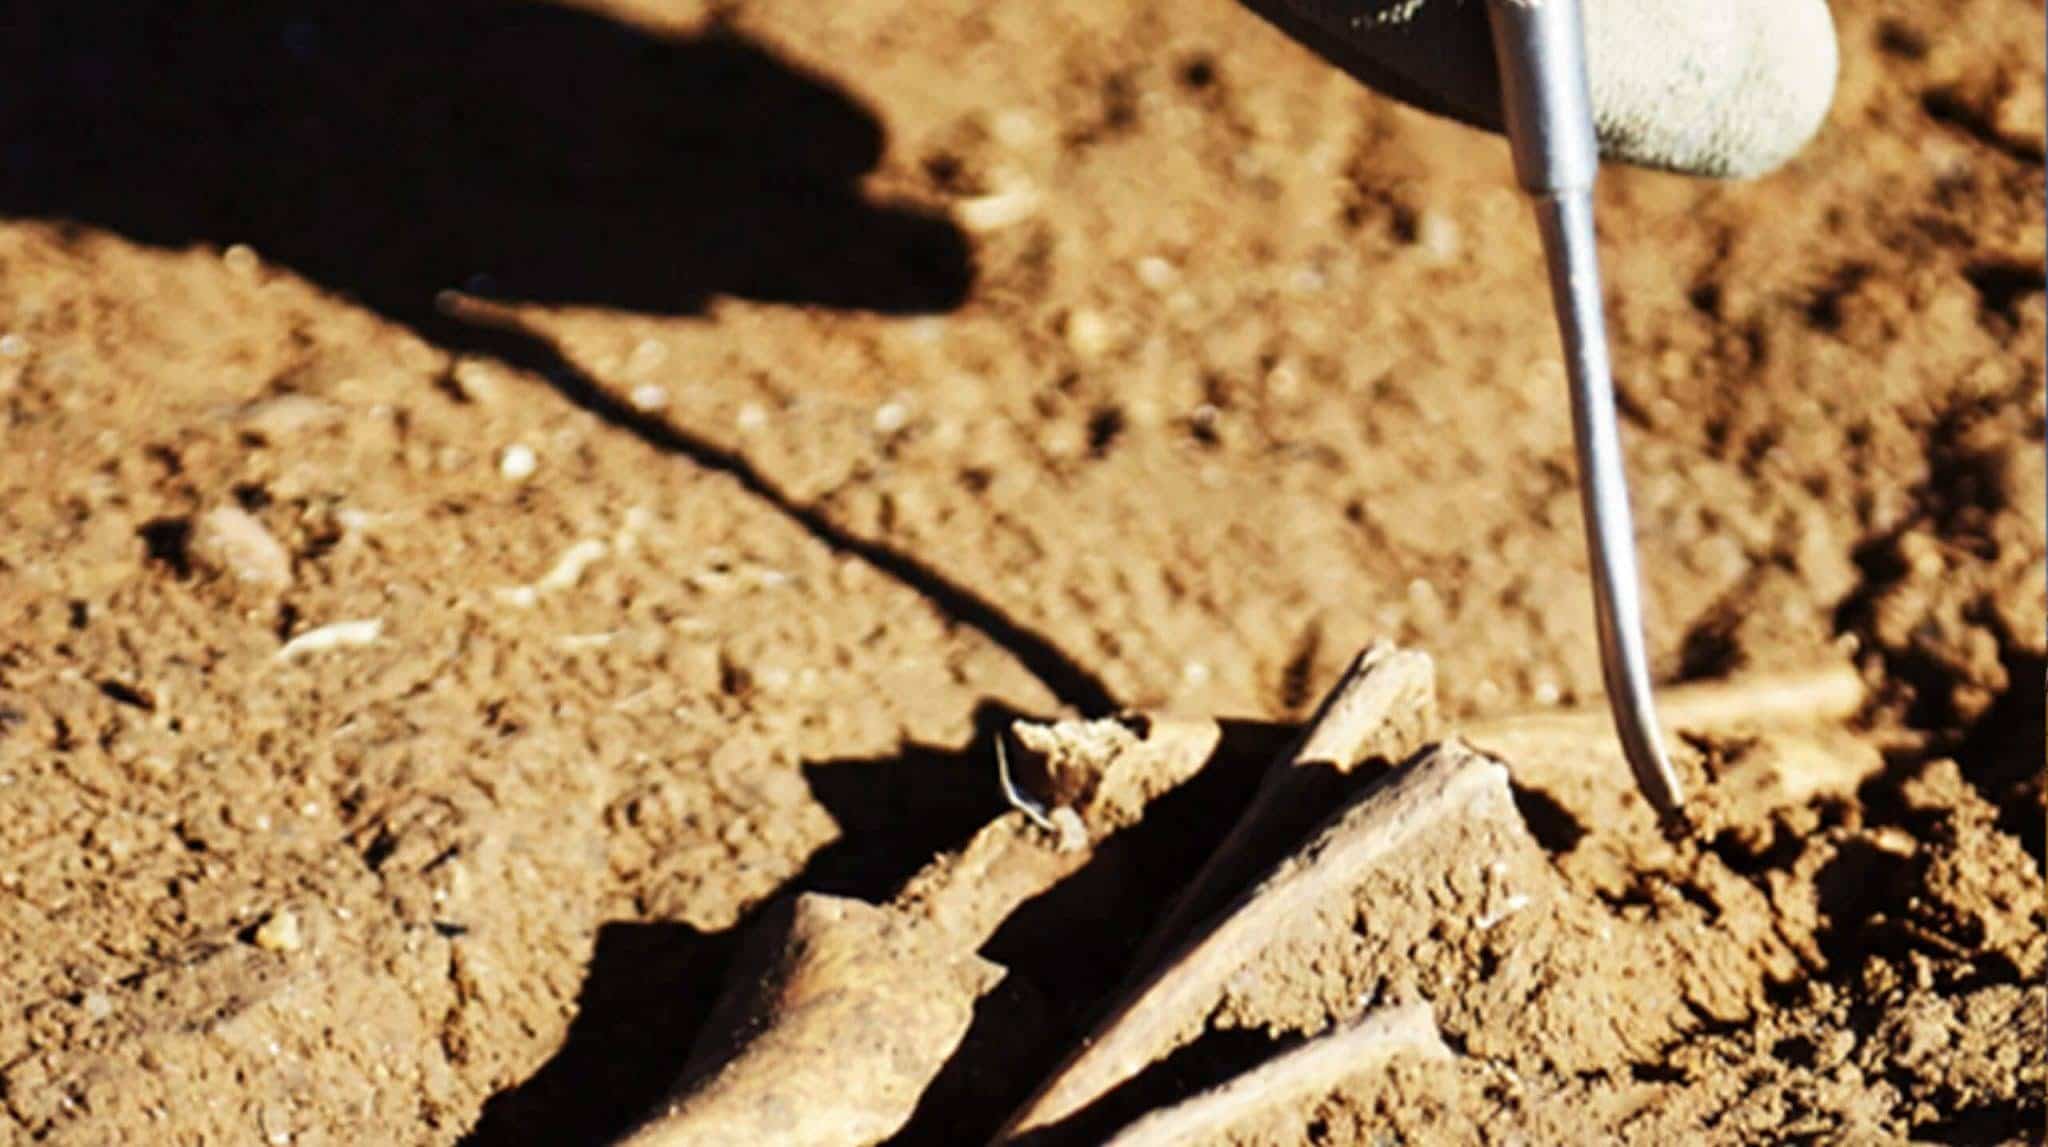 Silver Archaeological tool inspecting a bone in sand